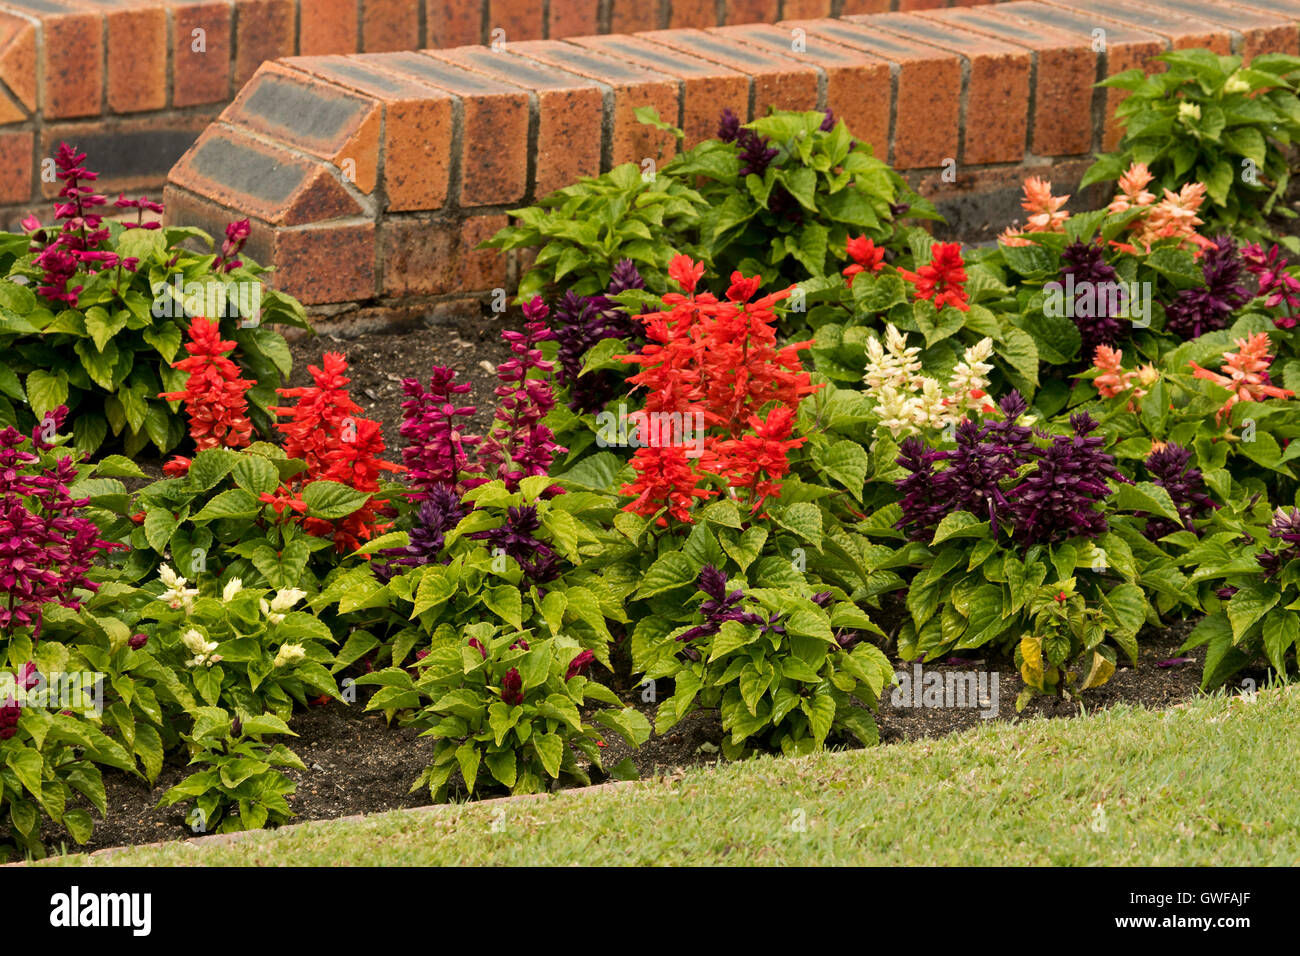 Multi-coloured annuals, salvia flowers, bright red, dark red, orange, & cream with emerald green leaves against brown brick wall Stock Photo